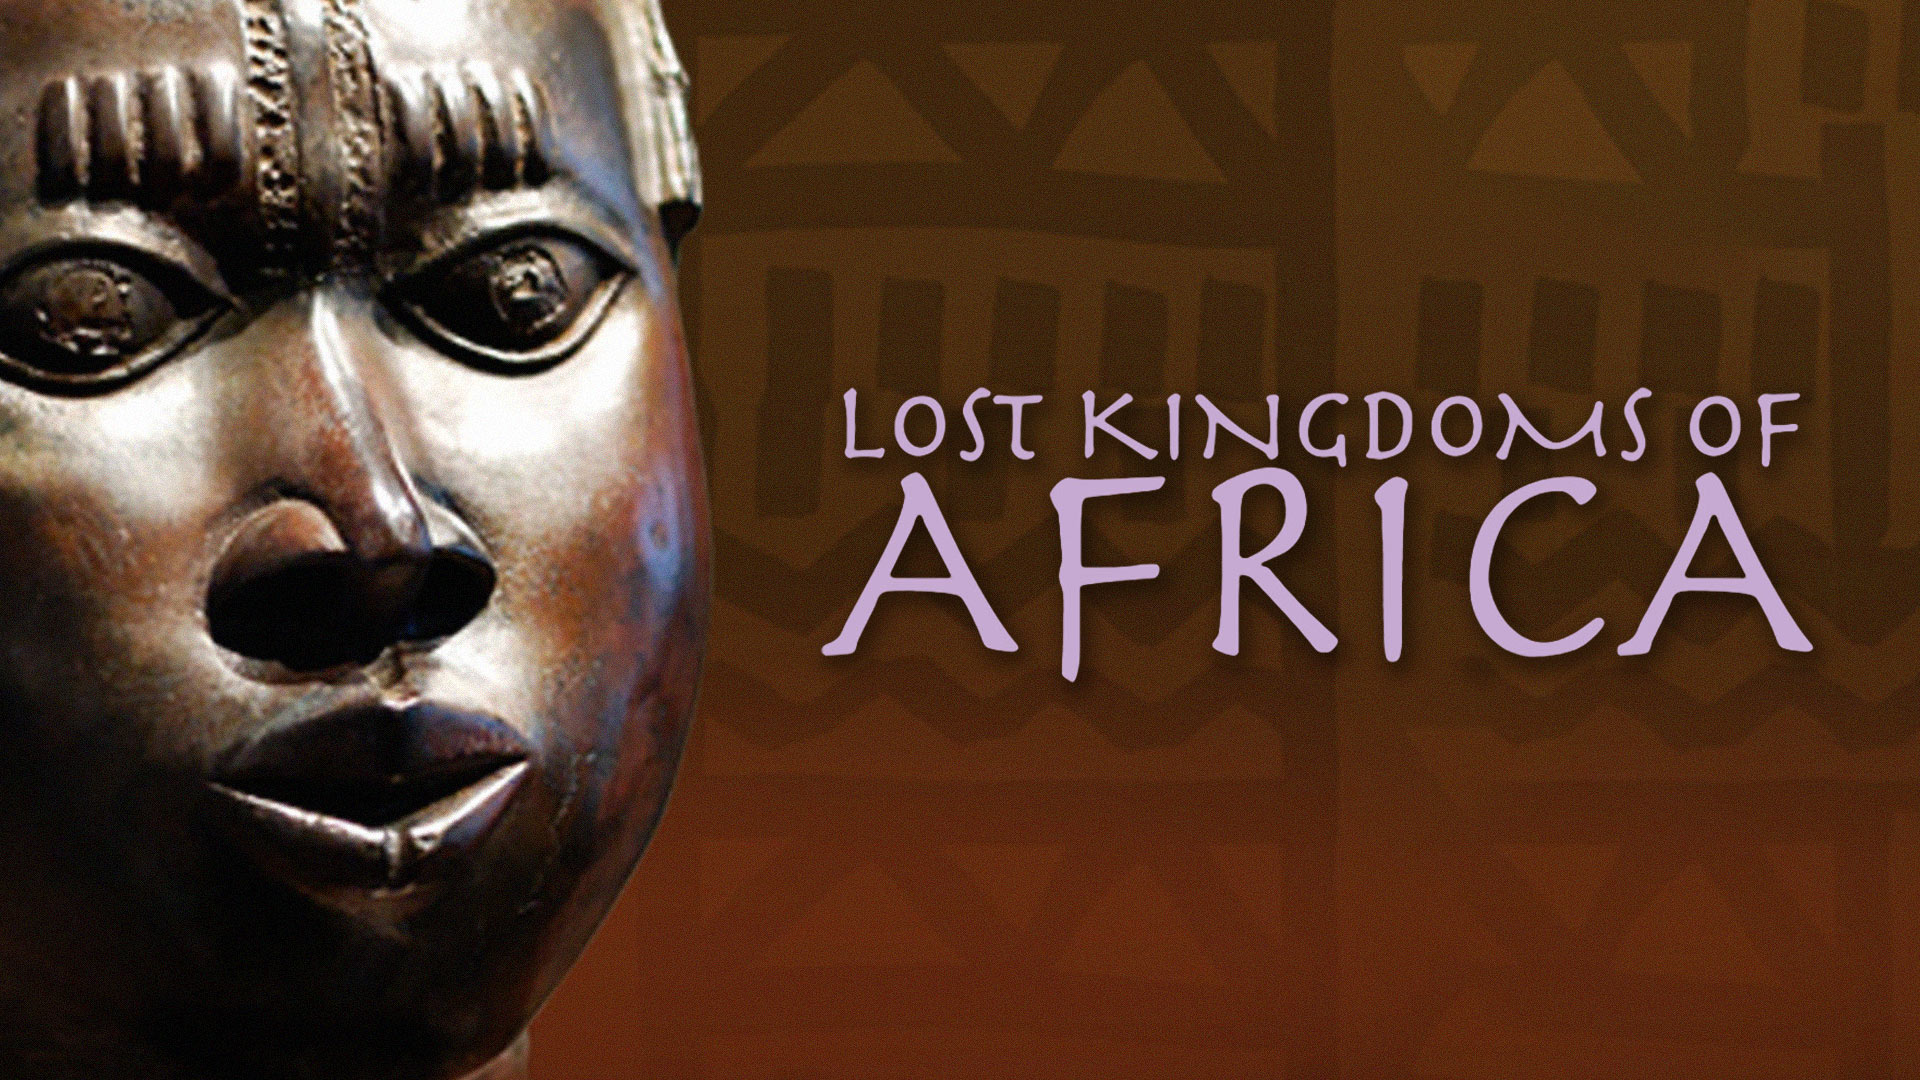 You are currently viewing Lost Kingdoms of Africa episode 4 – West Africa